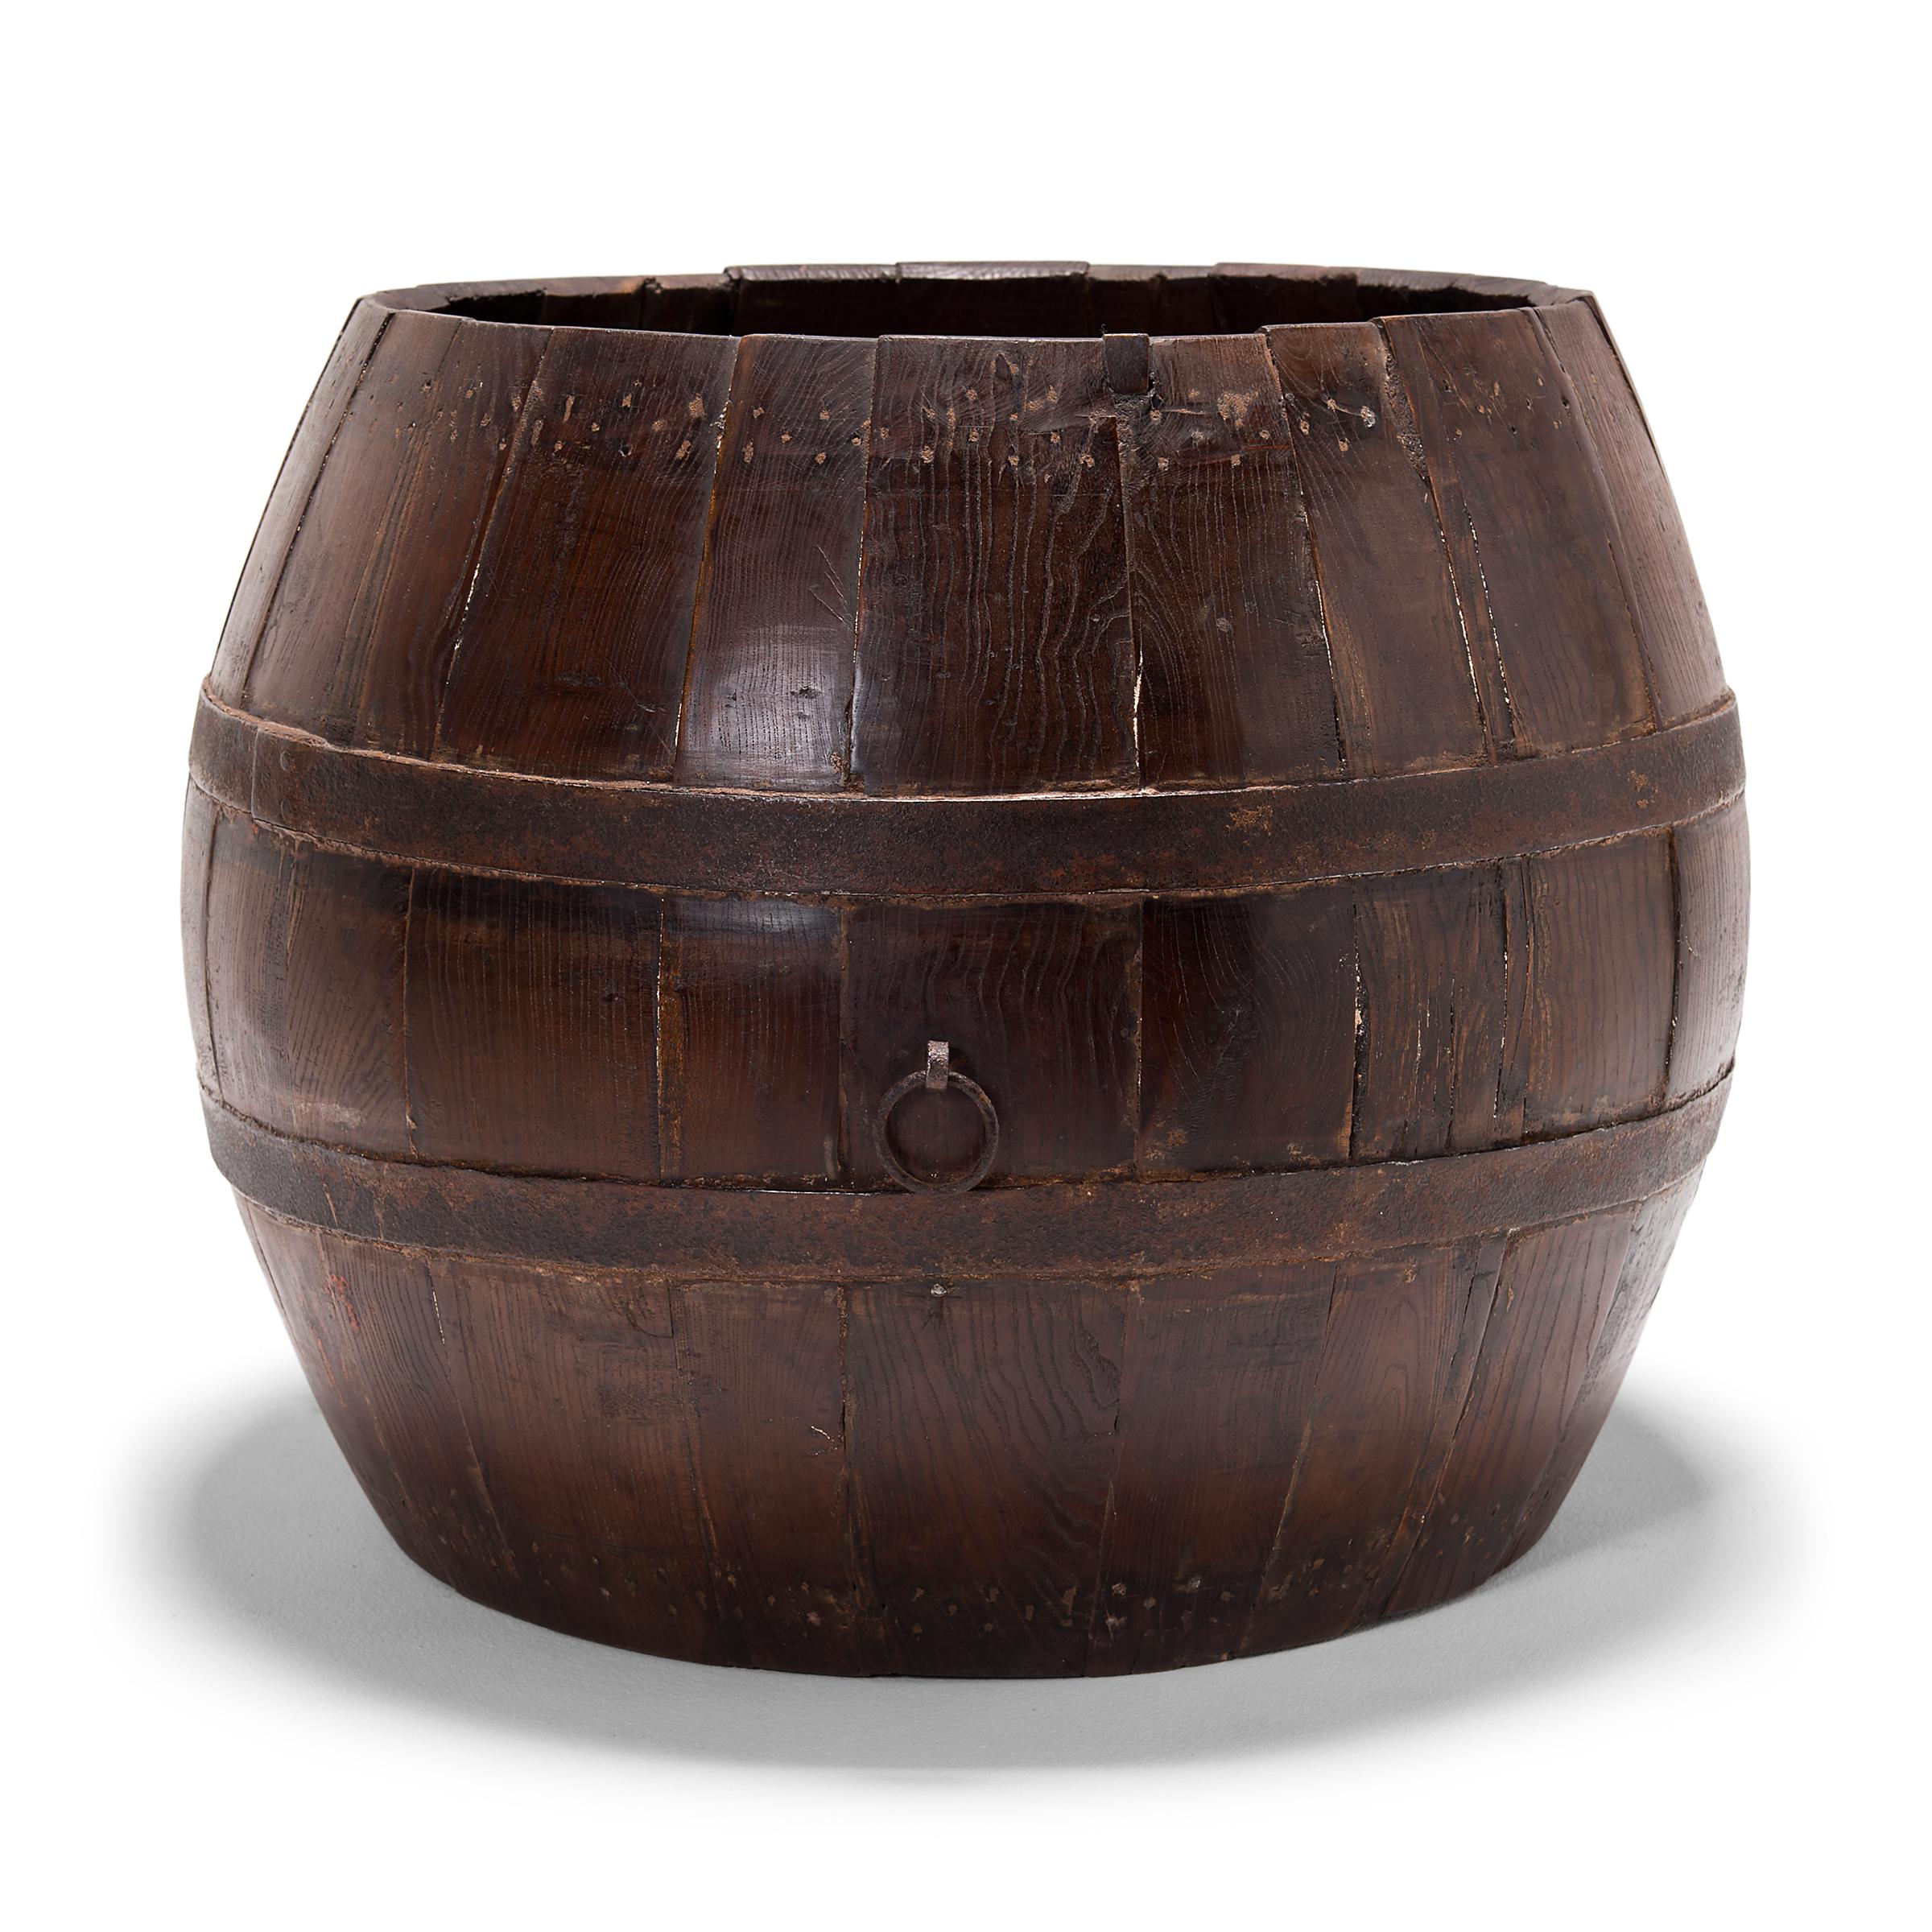 This squat, melon-like barrel is actually a turn of the century Peking opera drum, originally used by a theater troupe to accompany the dances and songs of traditional Chinese opera. The drum's finely joined oakwood slats are held together by